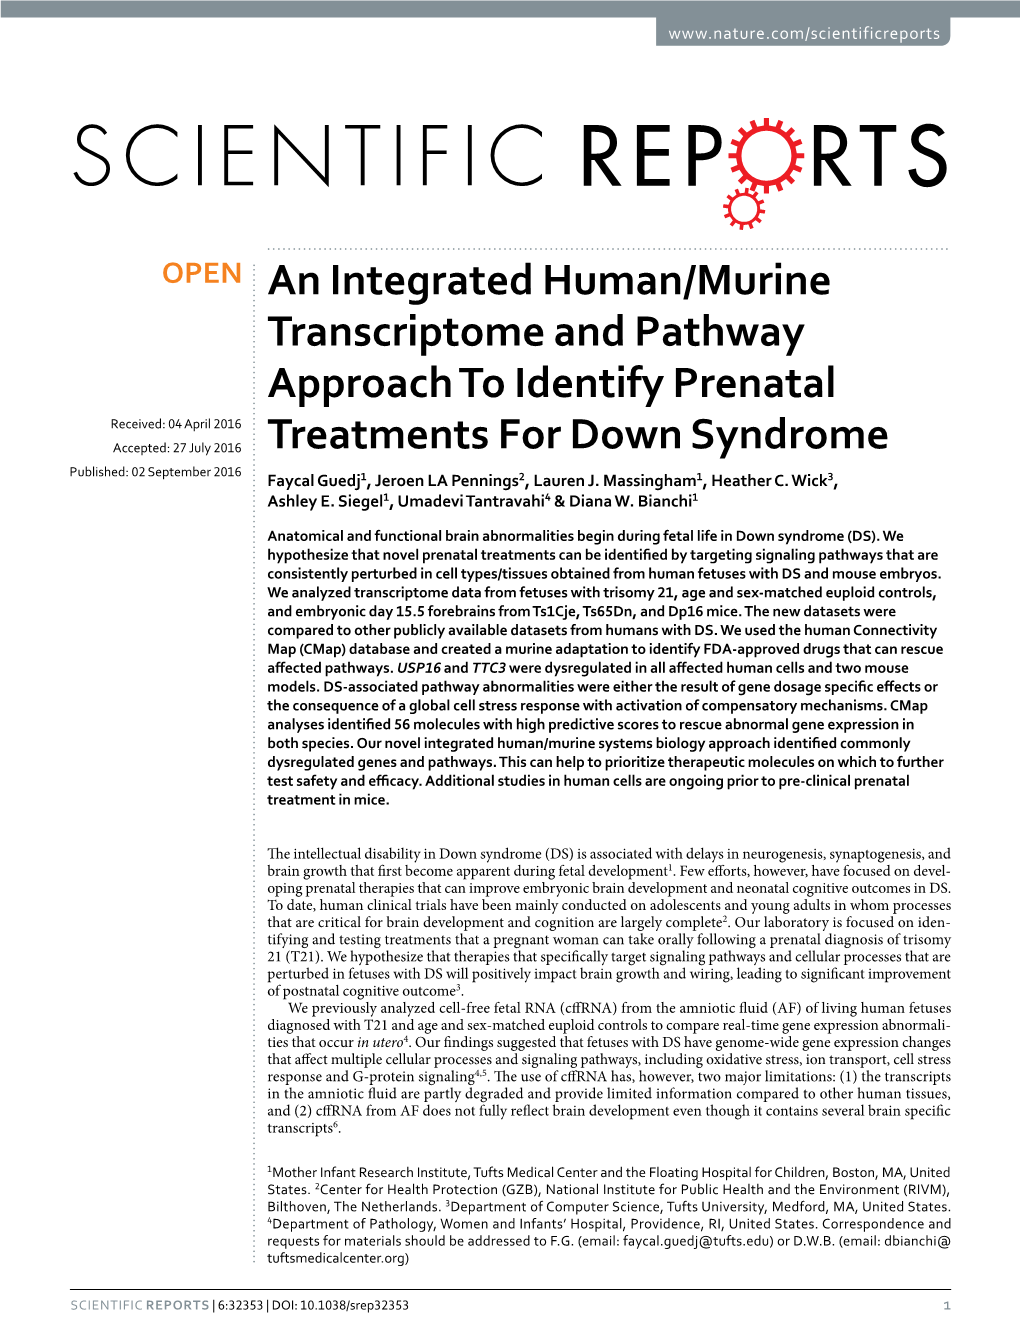 An Integrated Human/Murine Transcriptome and Pathway